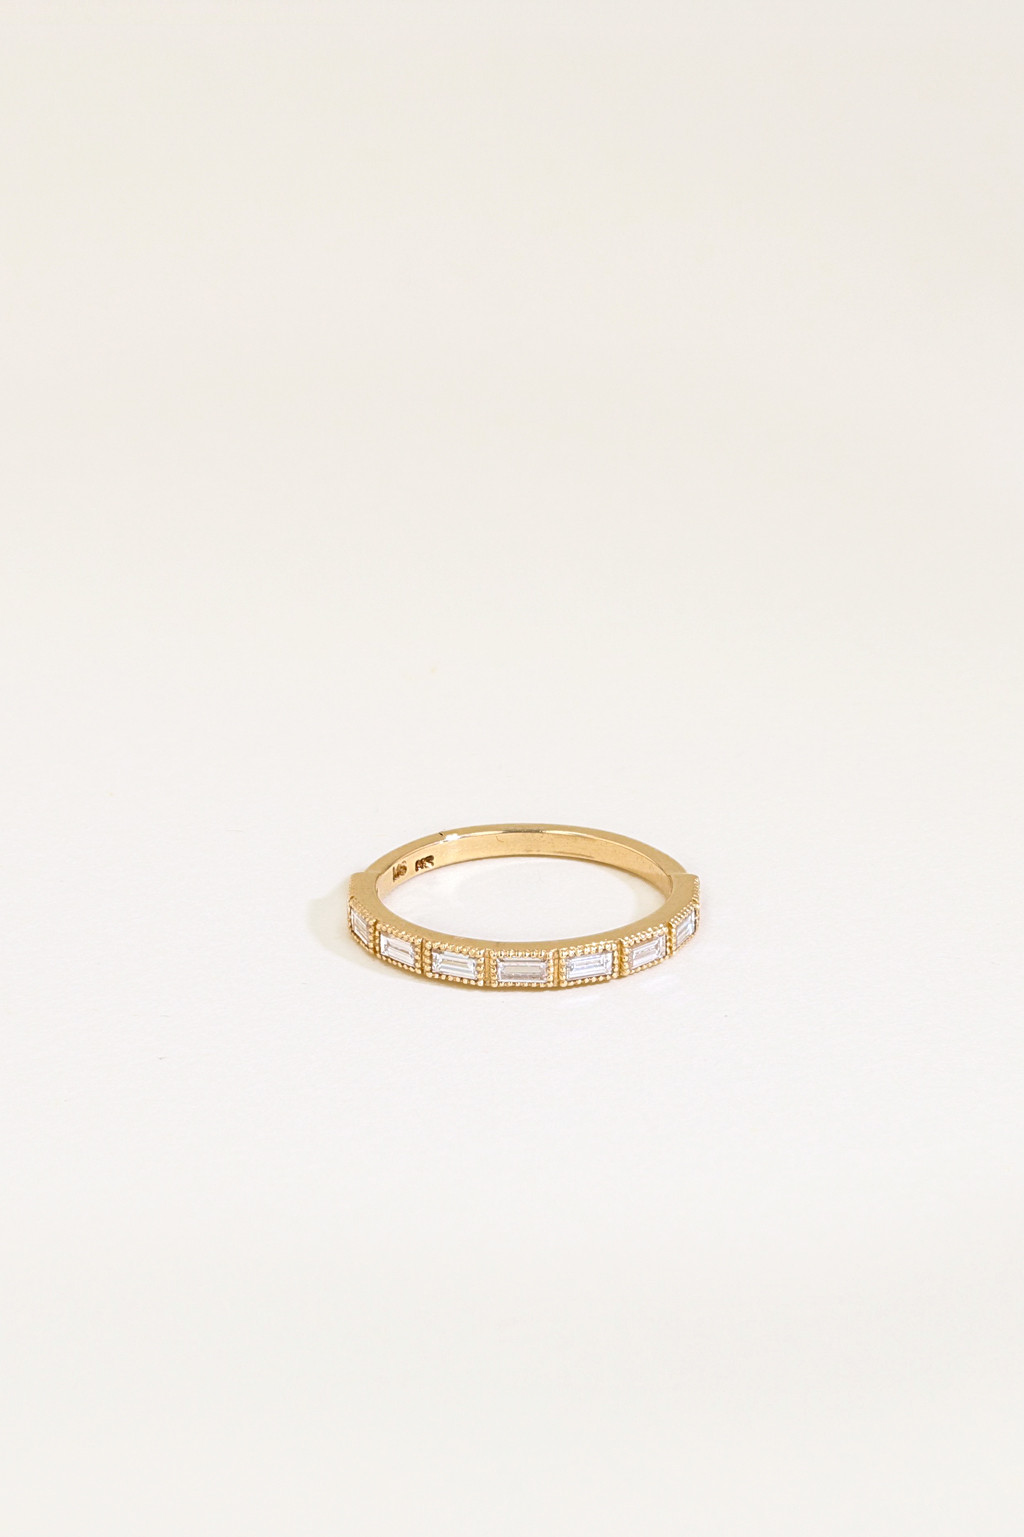 The Diamond Baguette Ring front view